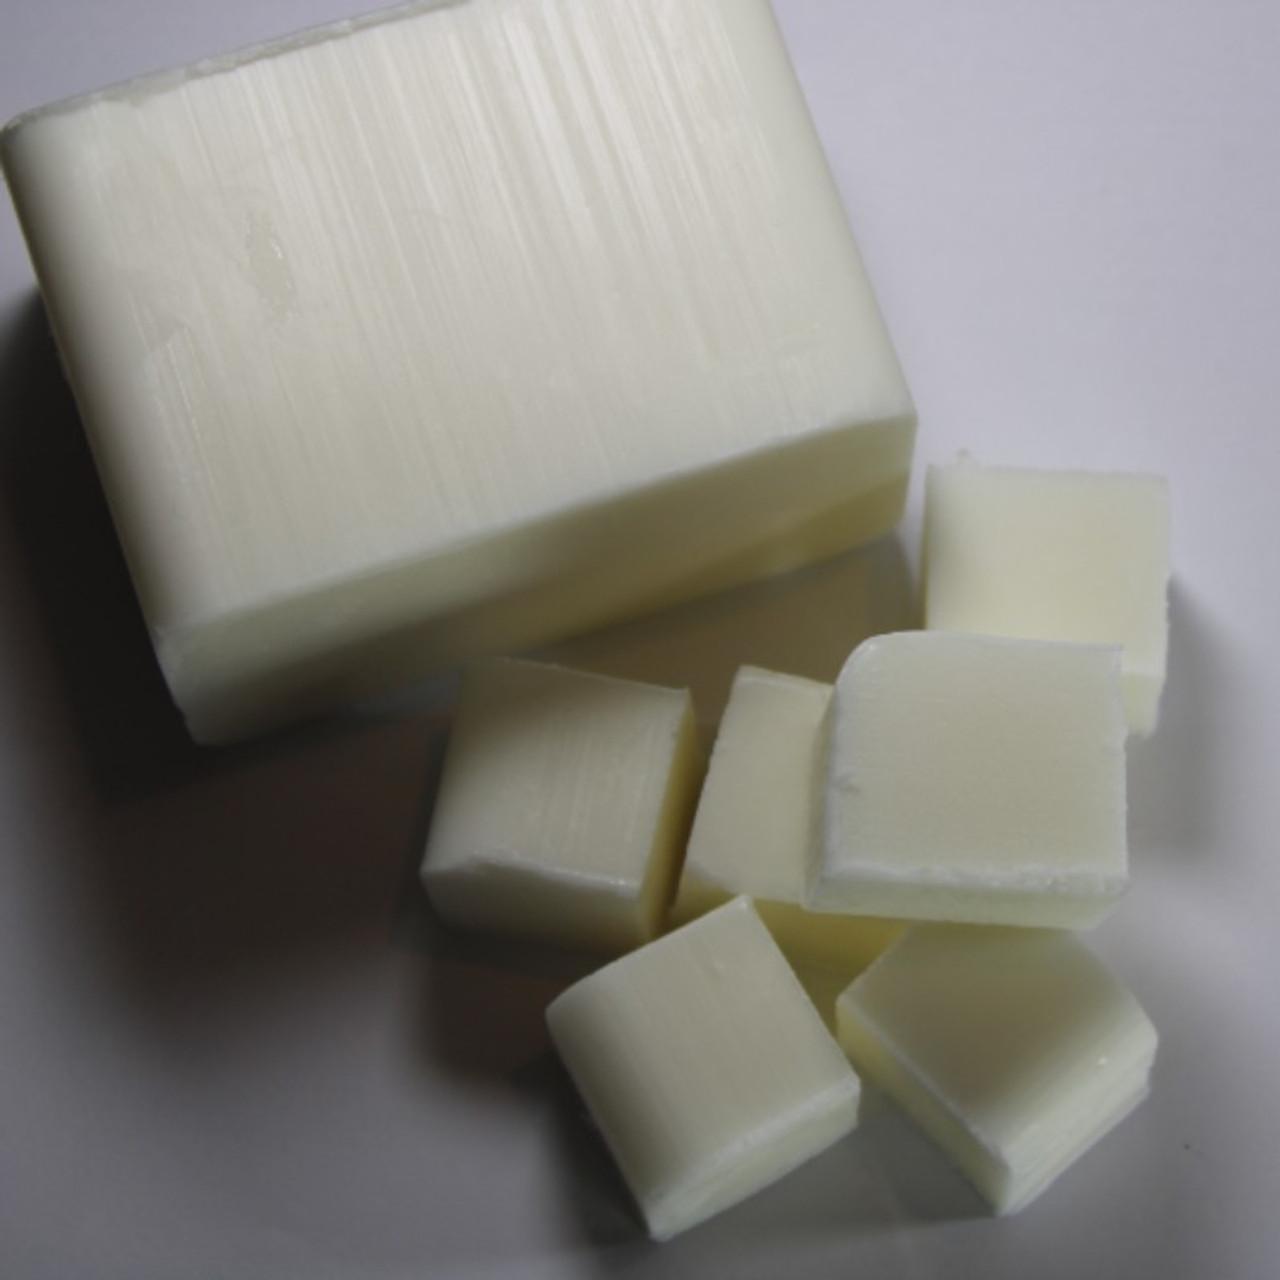 Clear - Melt and Pour Soap Base at Wholesale Prices